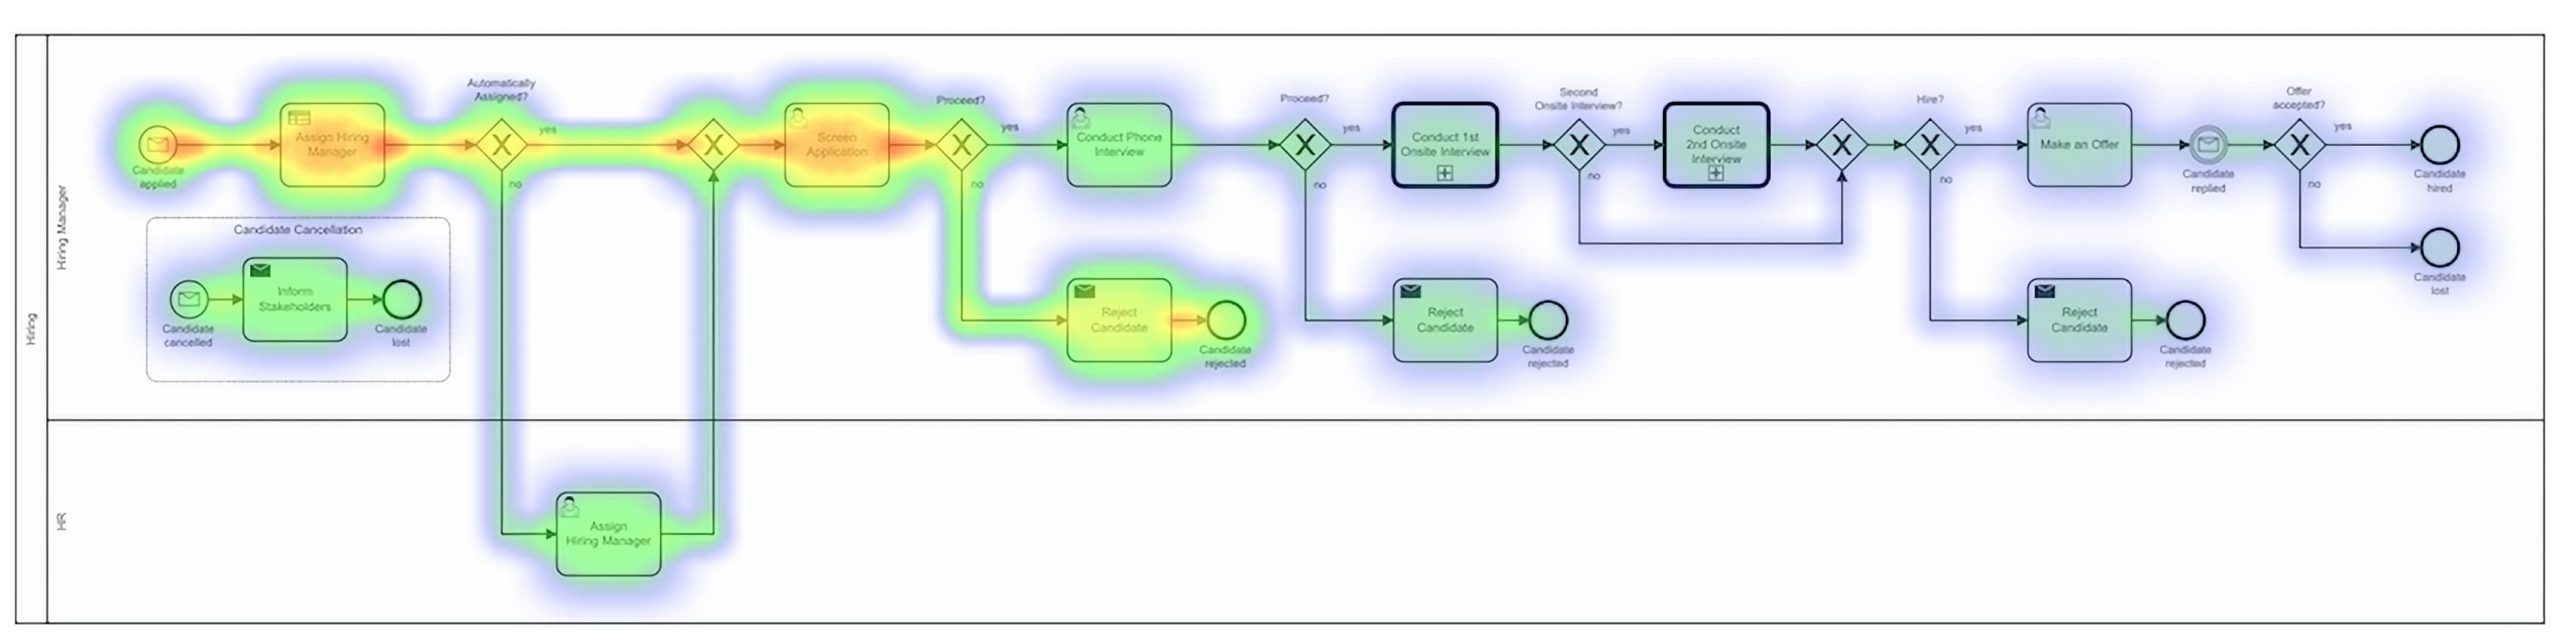 Example of a process heat map in Camunda